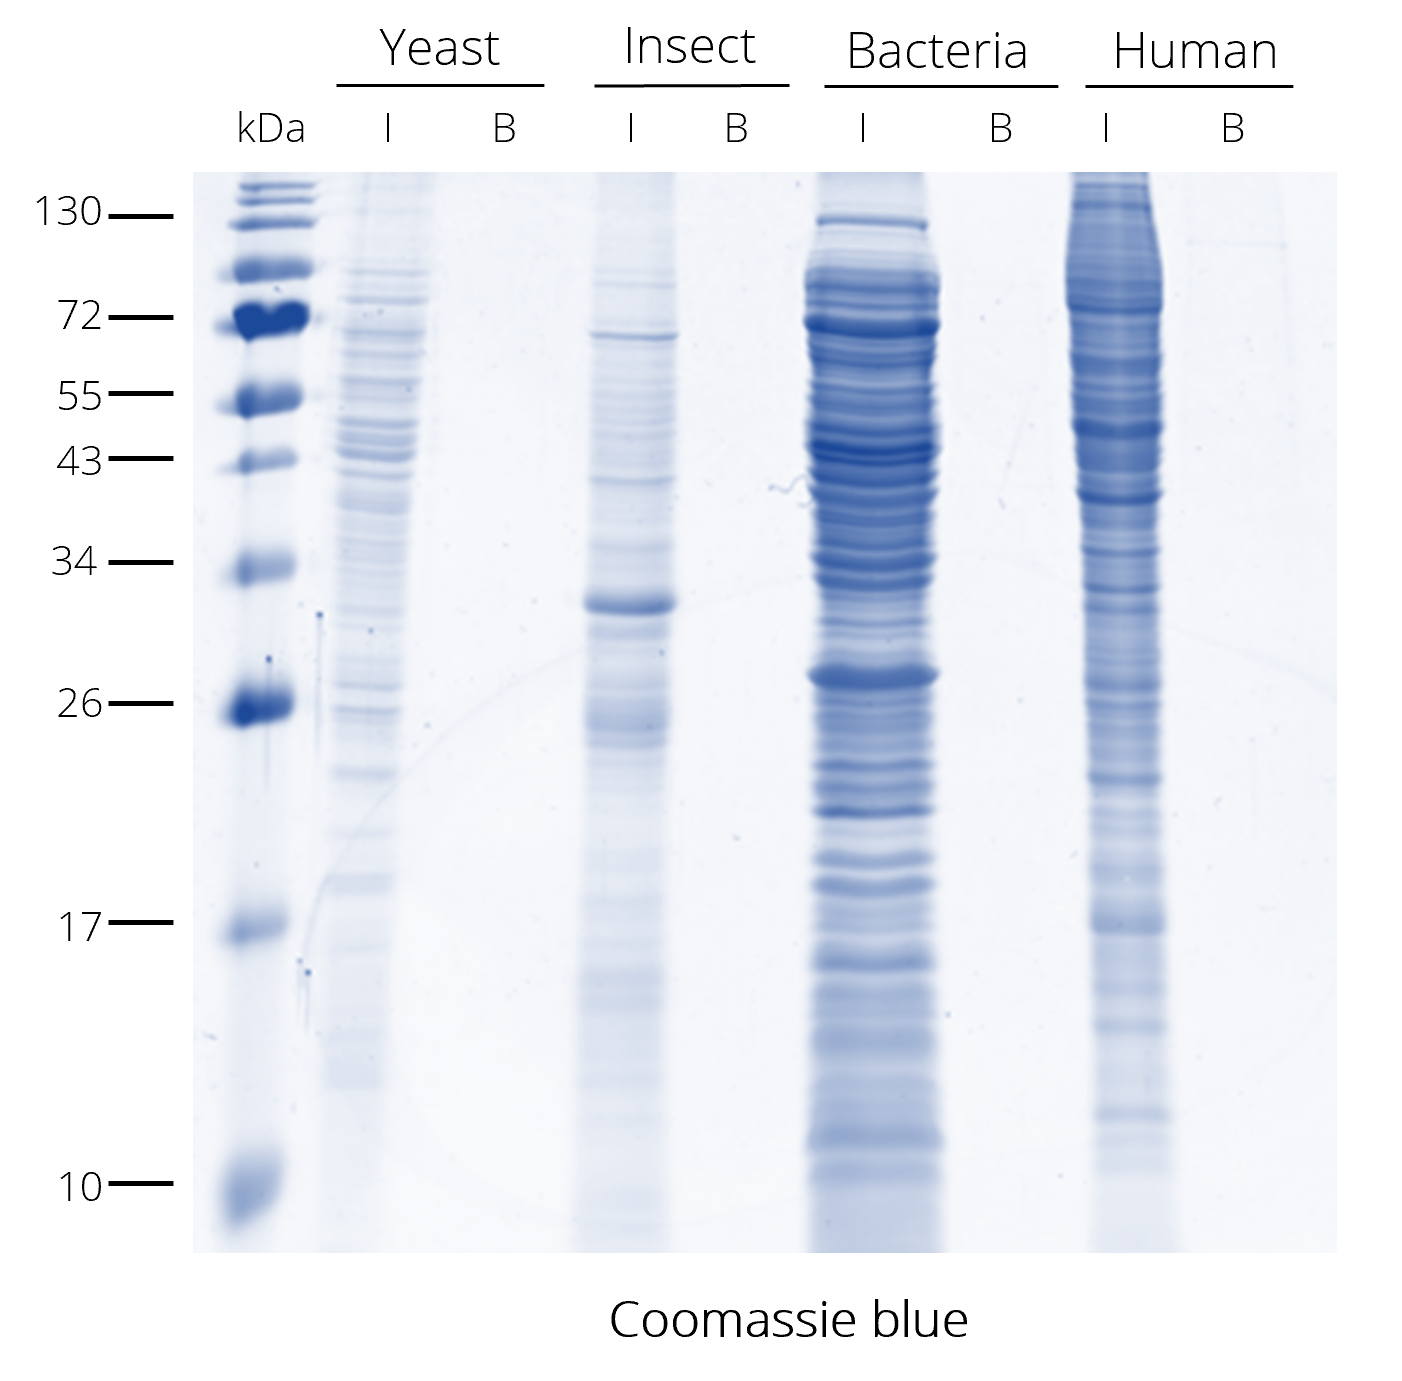 IP from different cell lysates without V5-tagged proteins => The V5-Trap® has very low background.